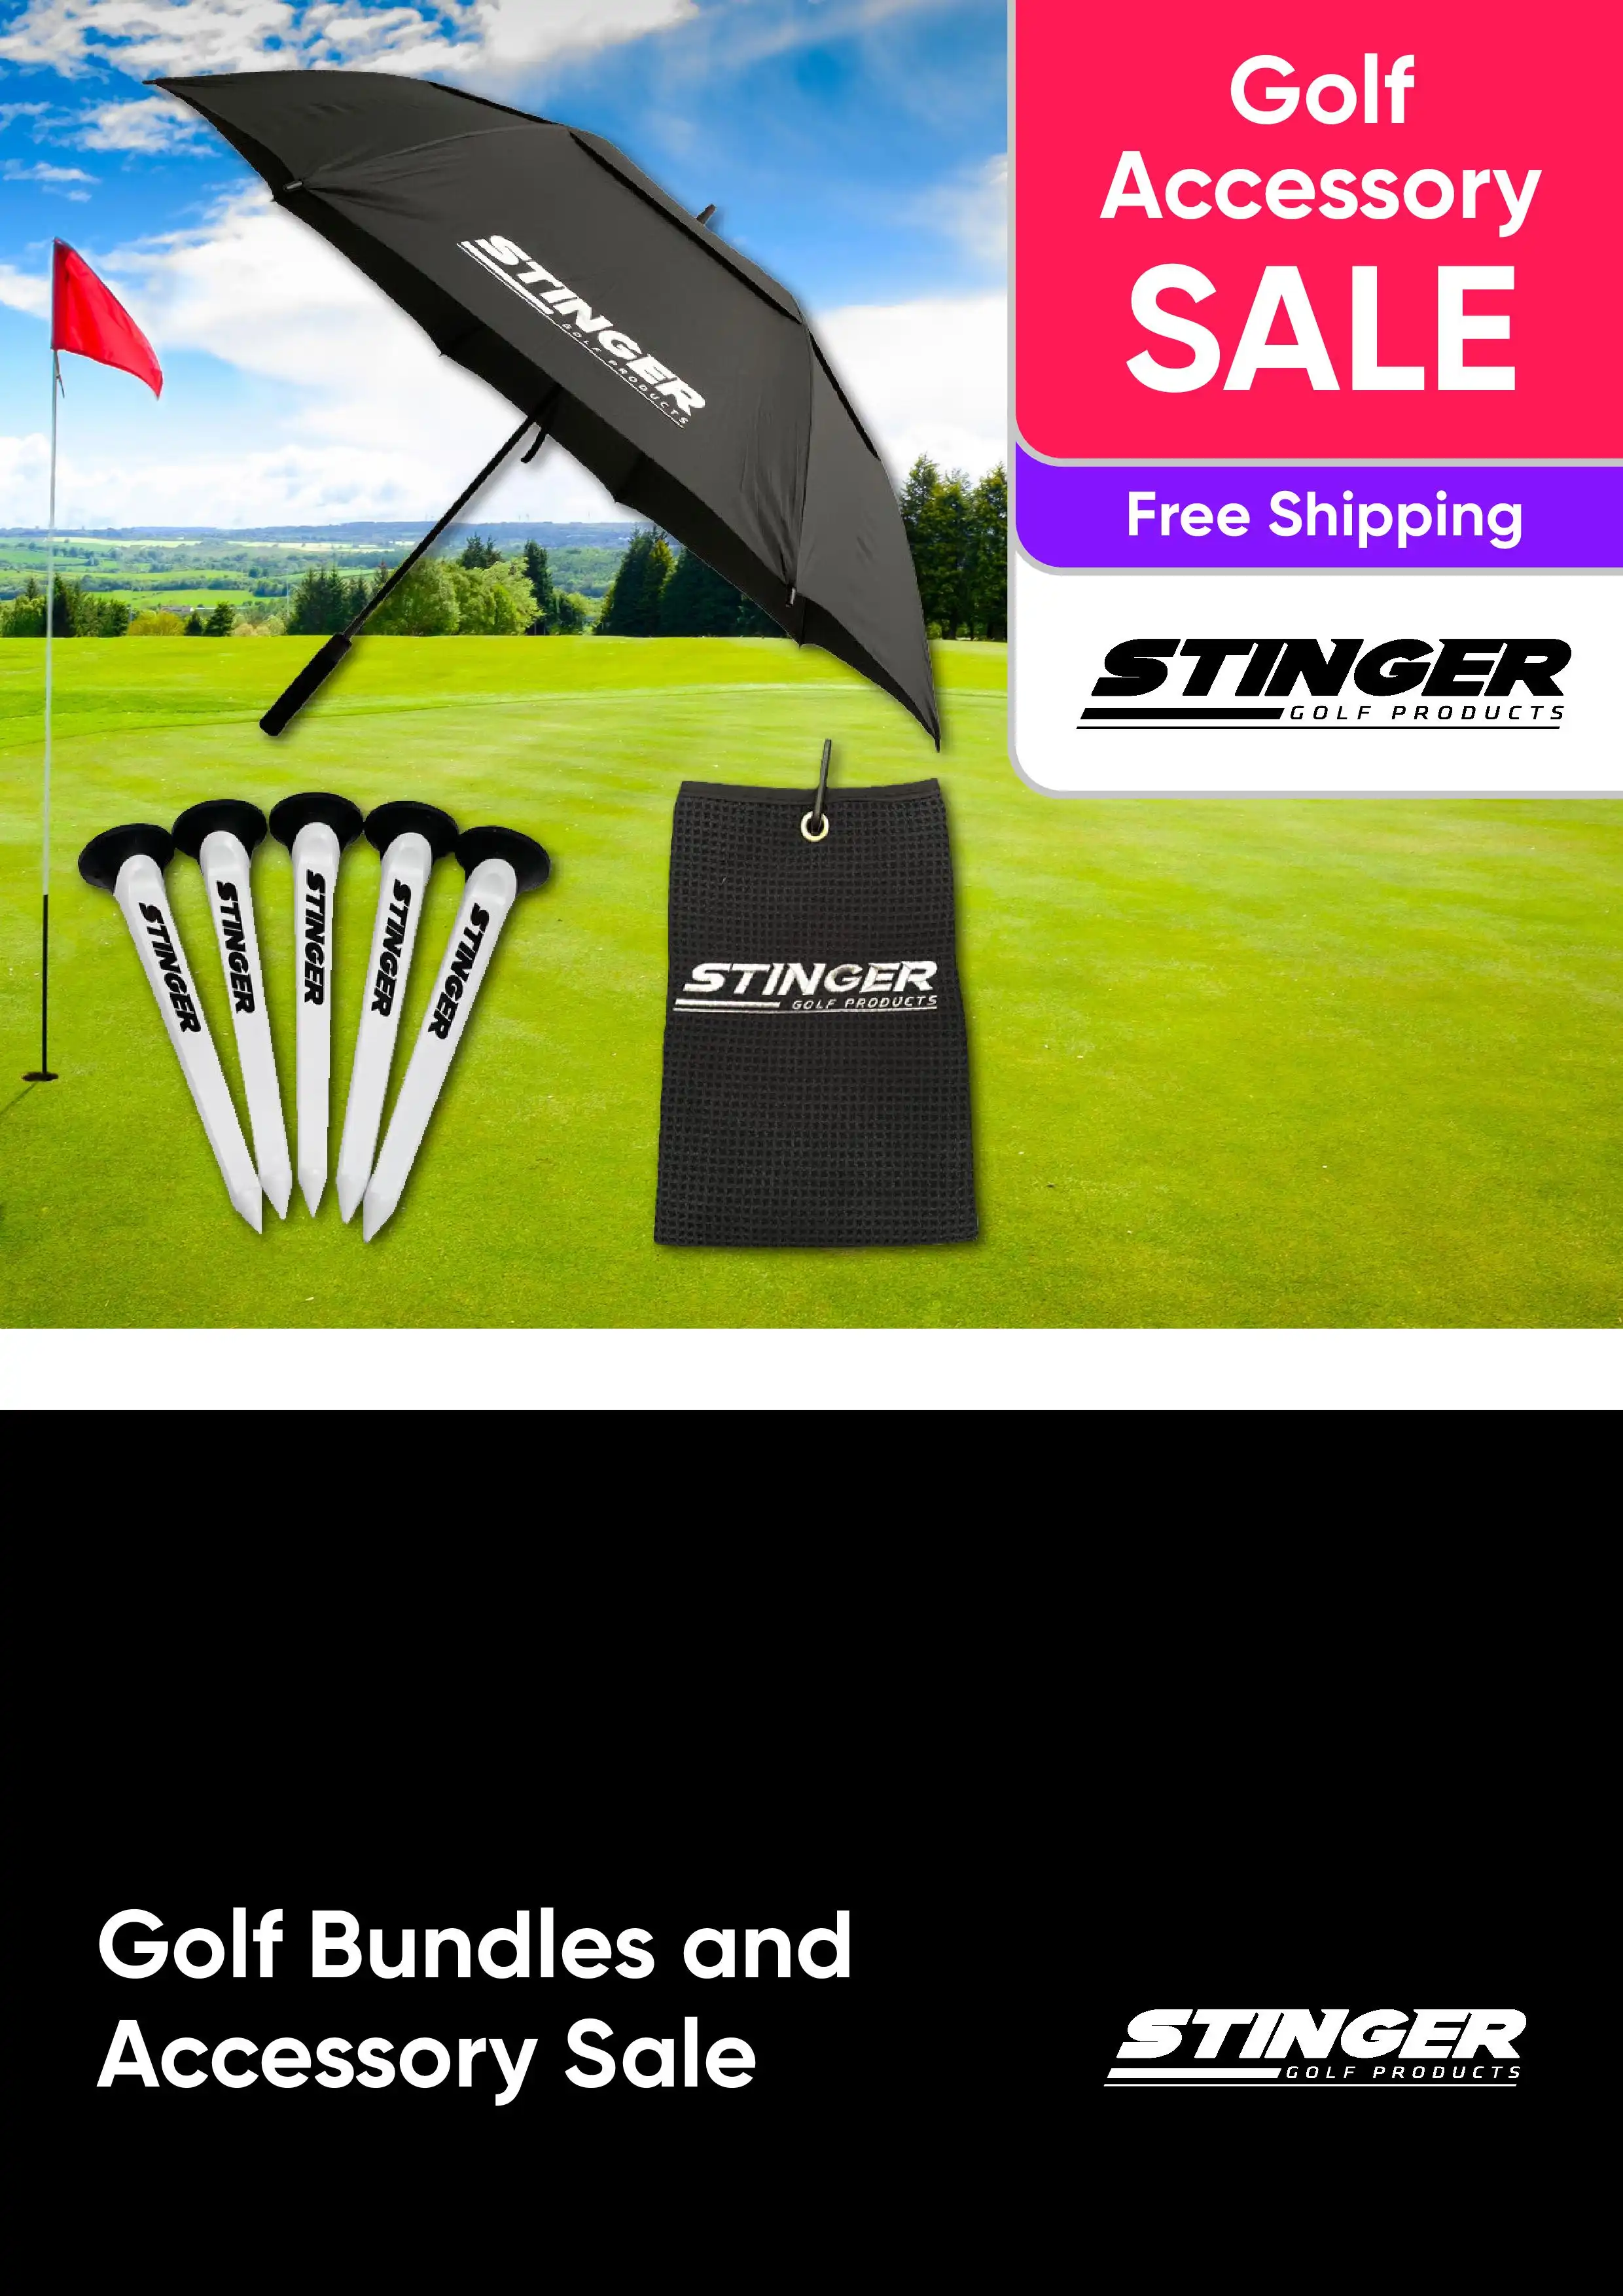 Golf Bundles and Accessory Sale - Umbrellas, Tees and more - Stinger Golf Products - Free Shipping